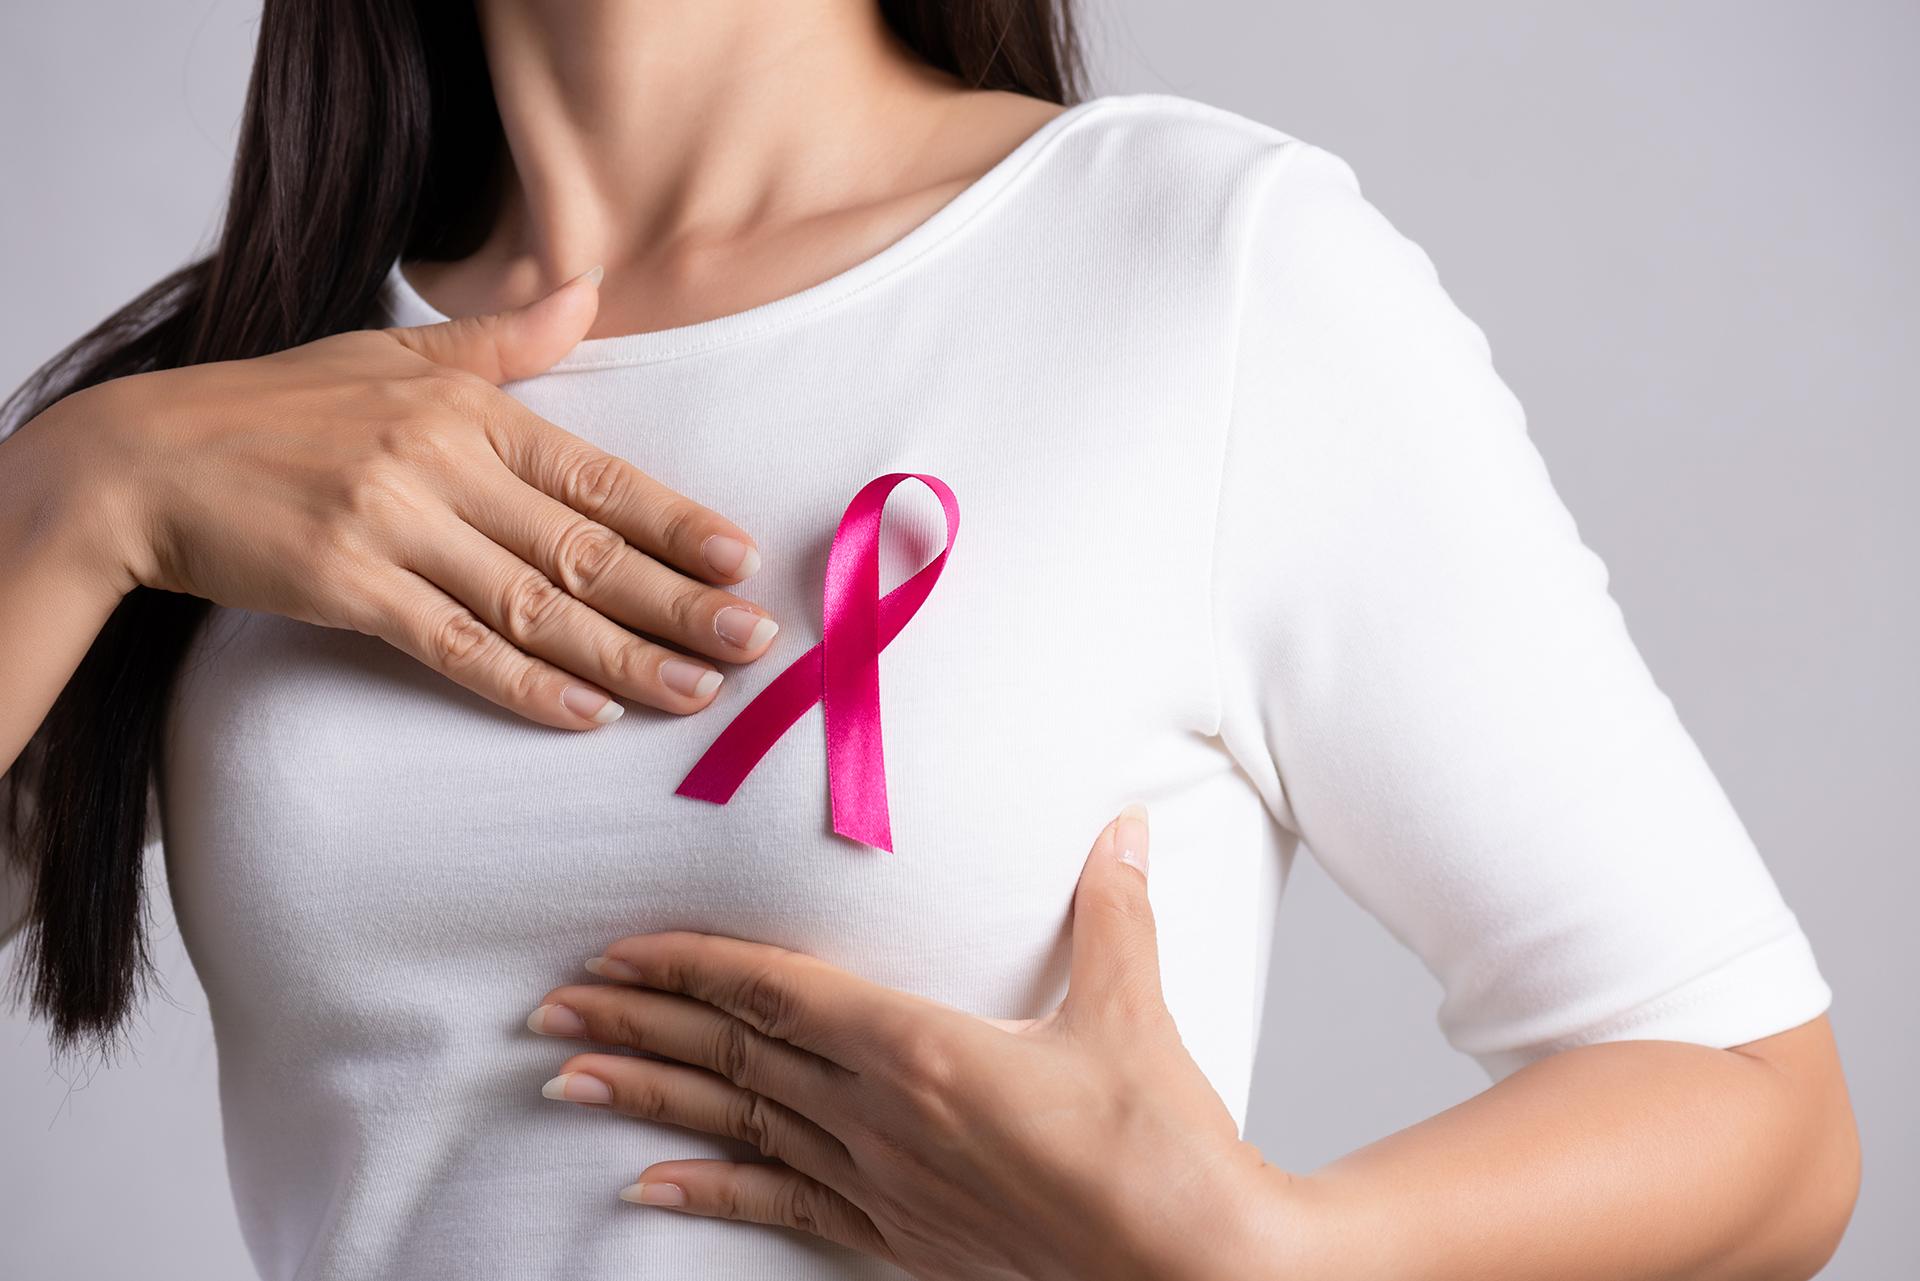 Breast Cancer: Causes, Symptoms, Home Test and Treatment